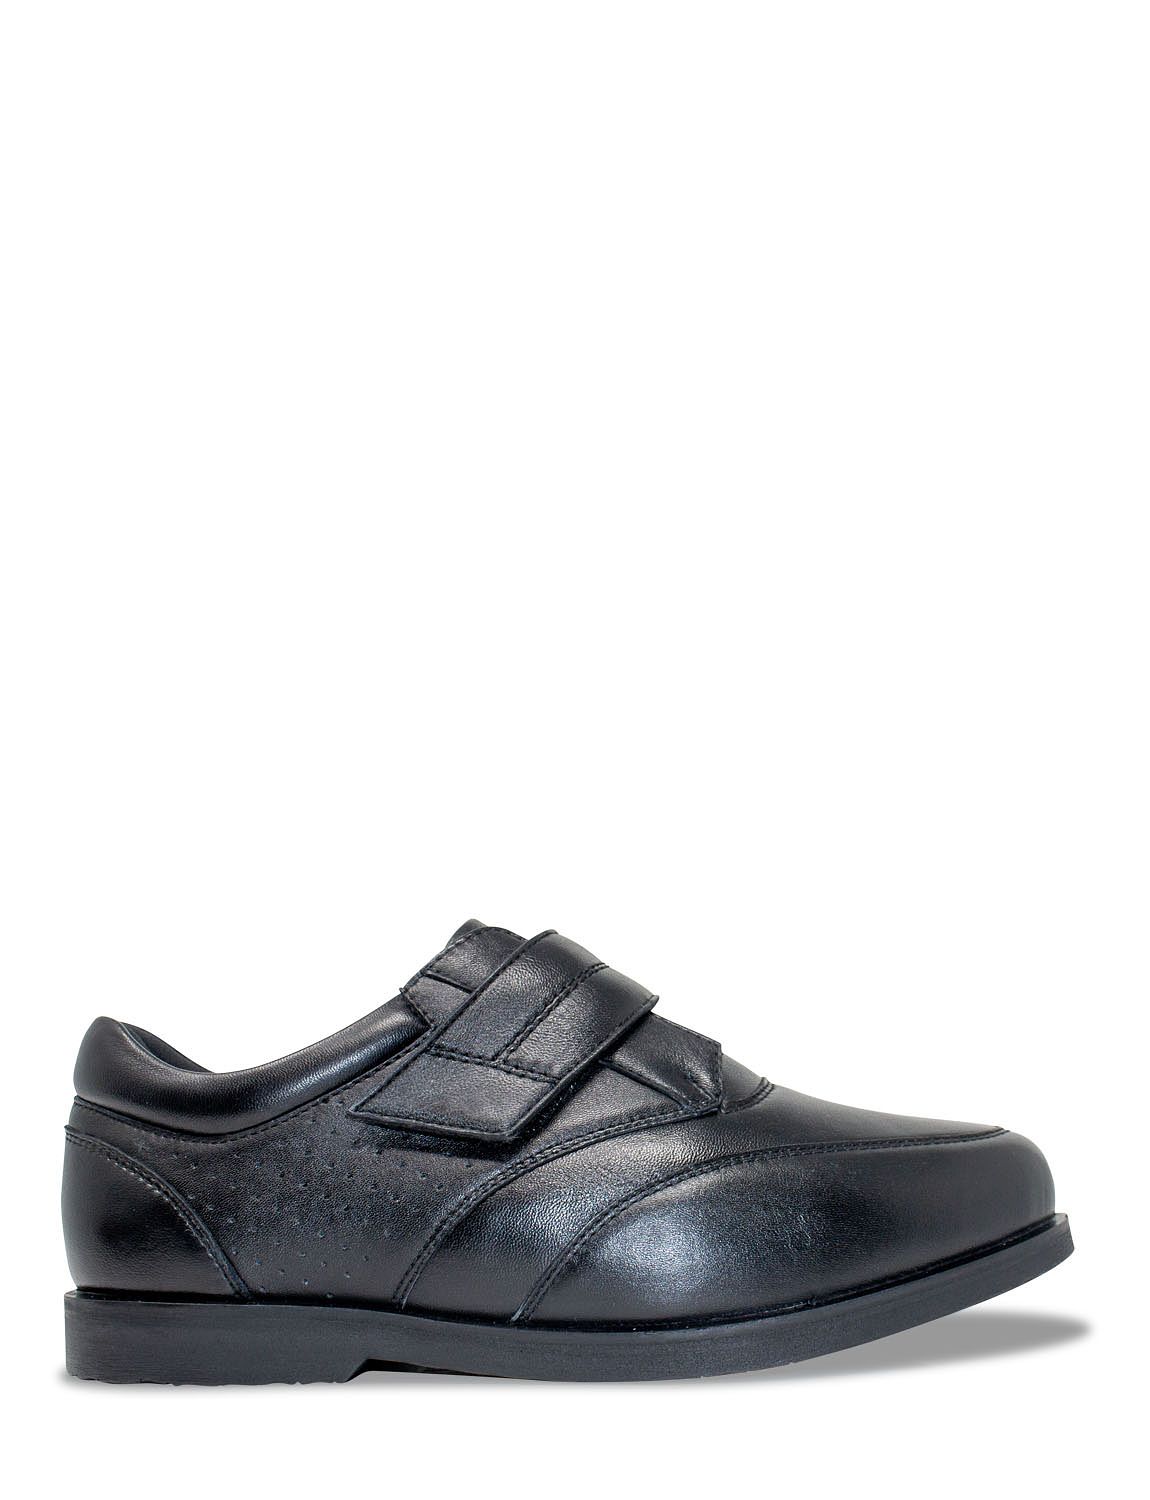 Pegasus Wide Fit Leather Touch Fasten Comfort Shoes | Chums